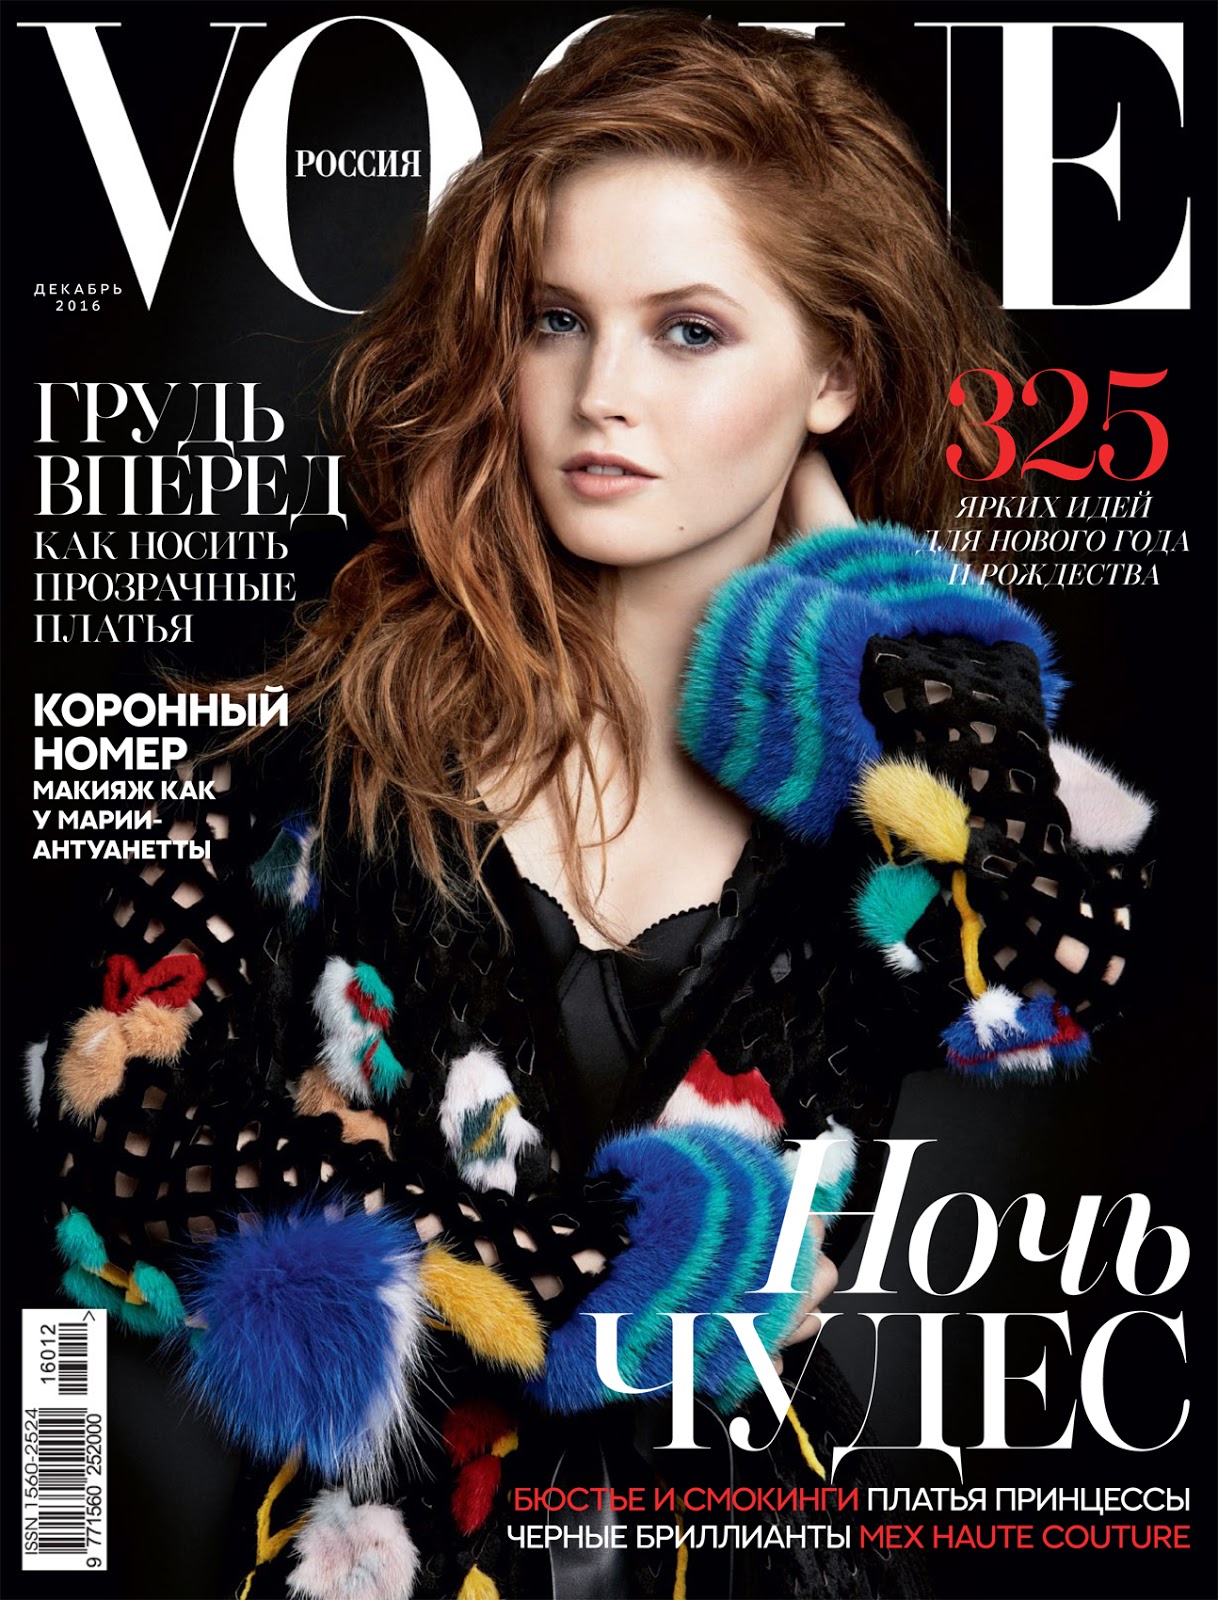 Ellie Bamber in Vogue Russia December 2016 by Patrick Demarchelier